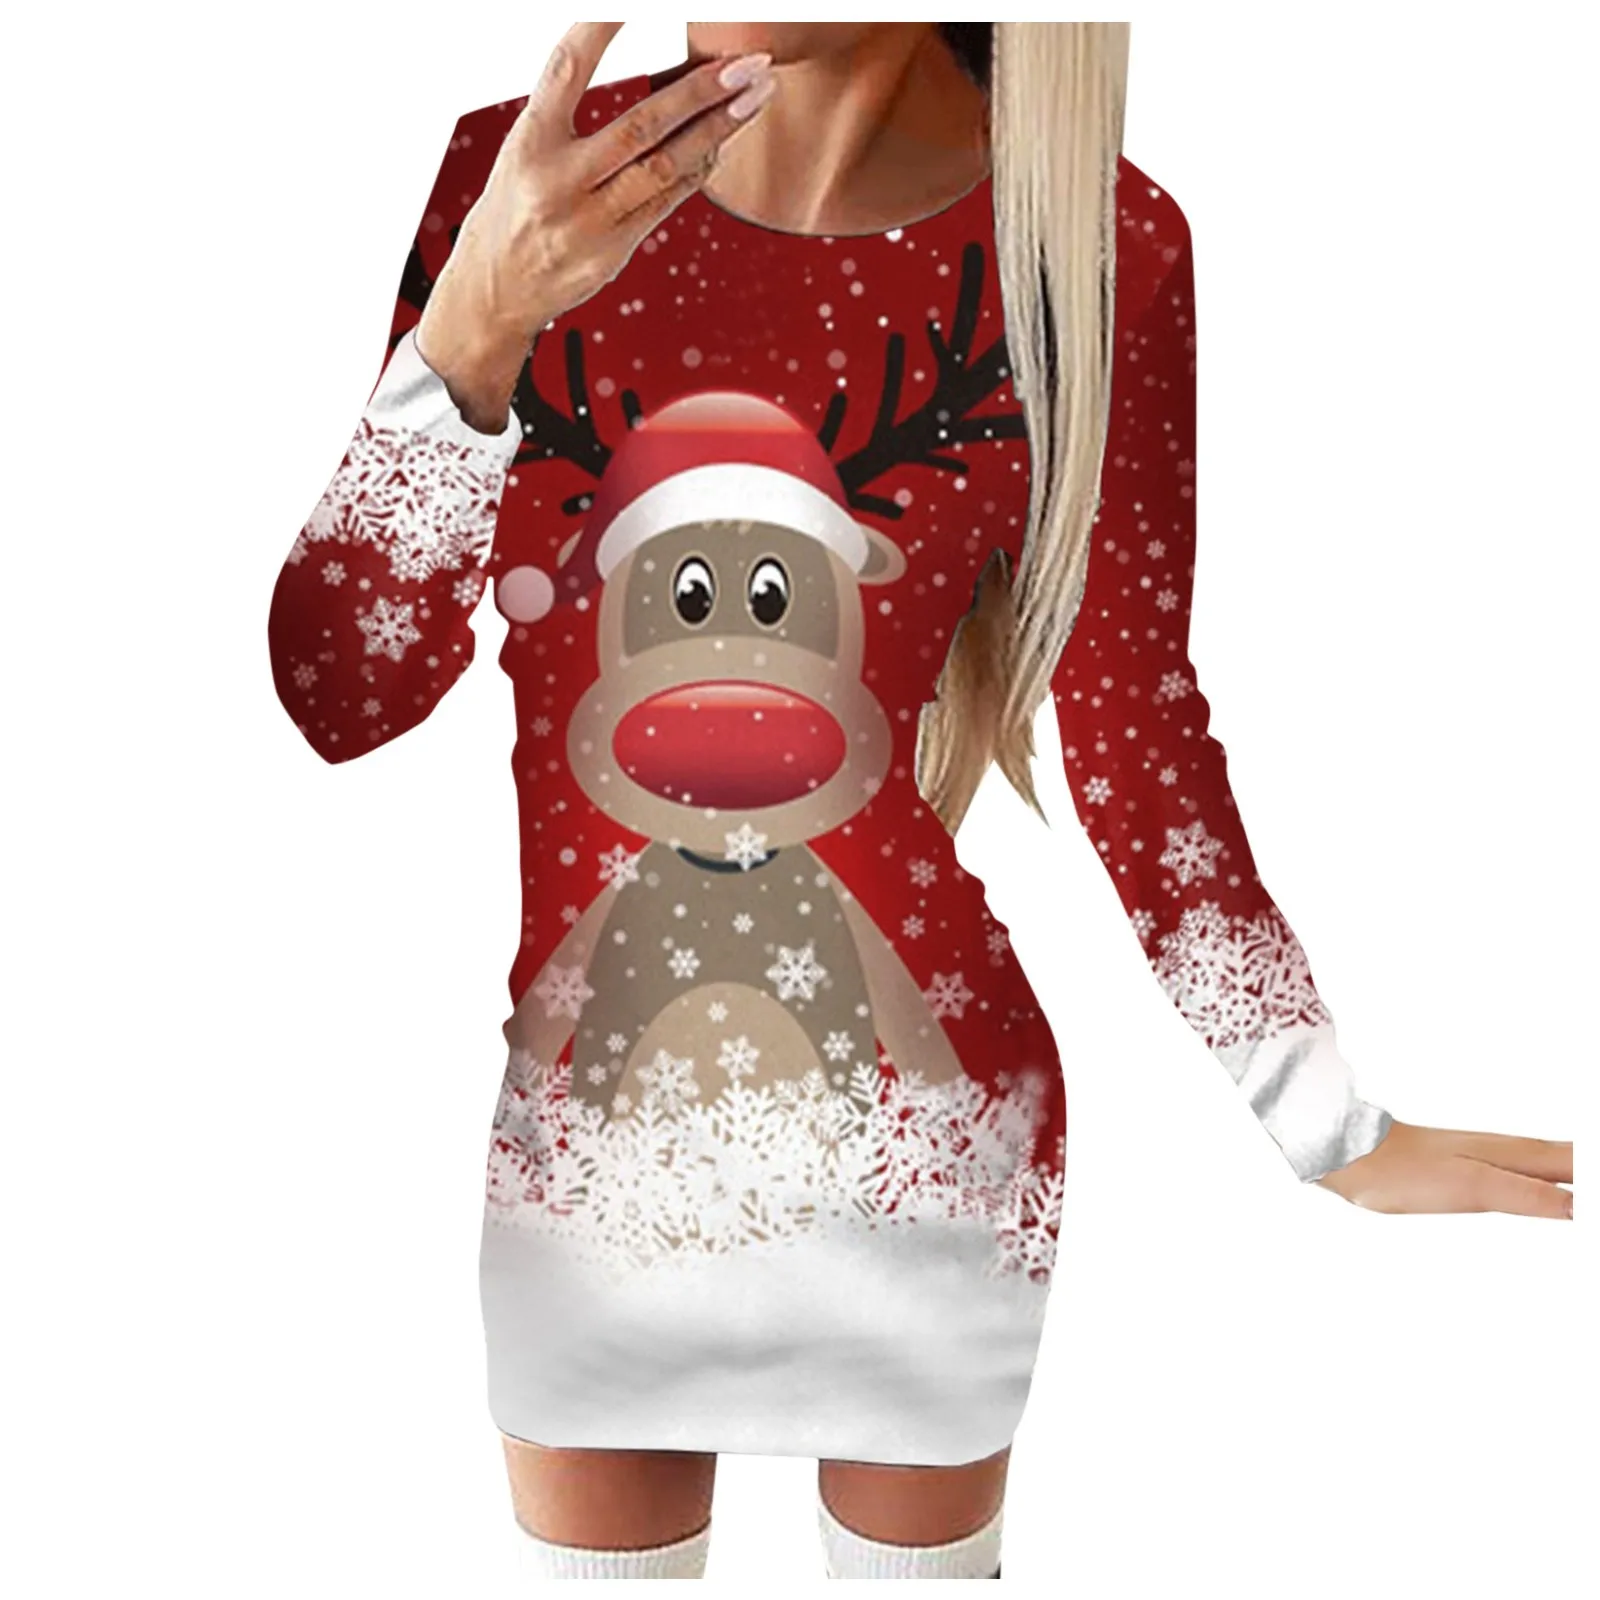 Autumn Winter Women Bodycon Santa Claus Printed Casual Mini Dress For Christmas, Party, Daily Wear. 